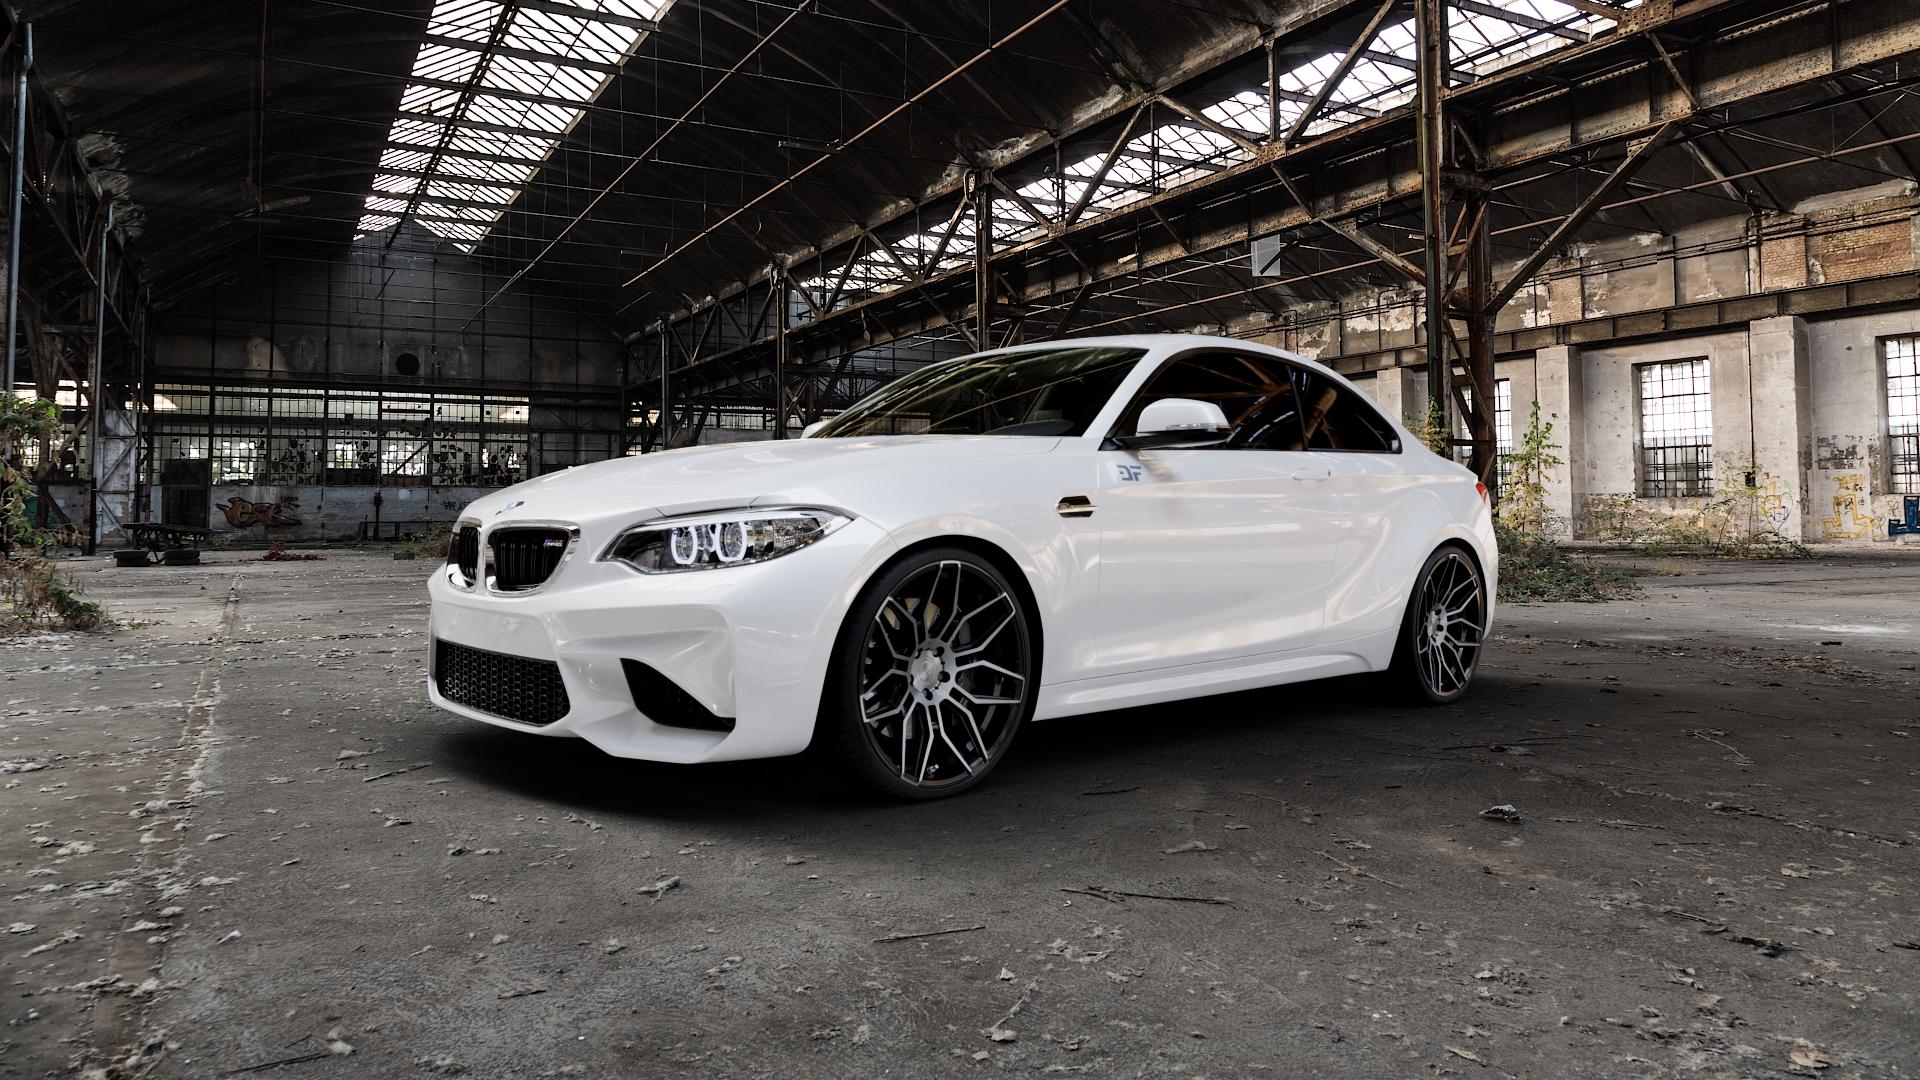 BMW M2 Type F87 3,0l 331kW CS (450 hp) Wheels and Tyre Packages |  velonity.com